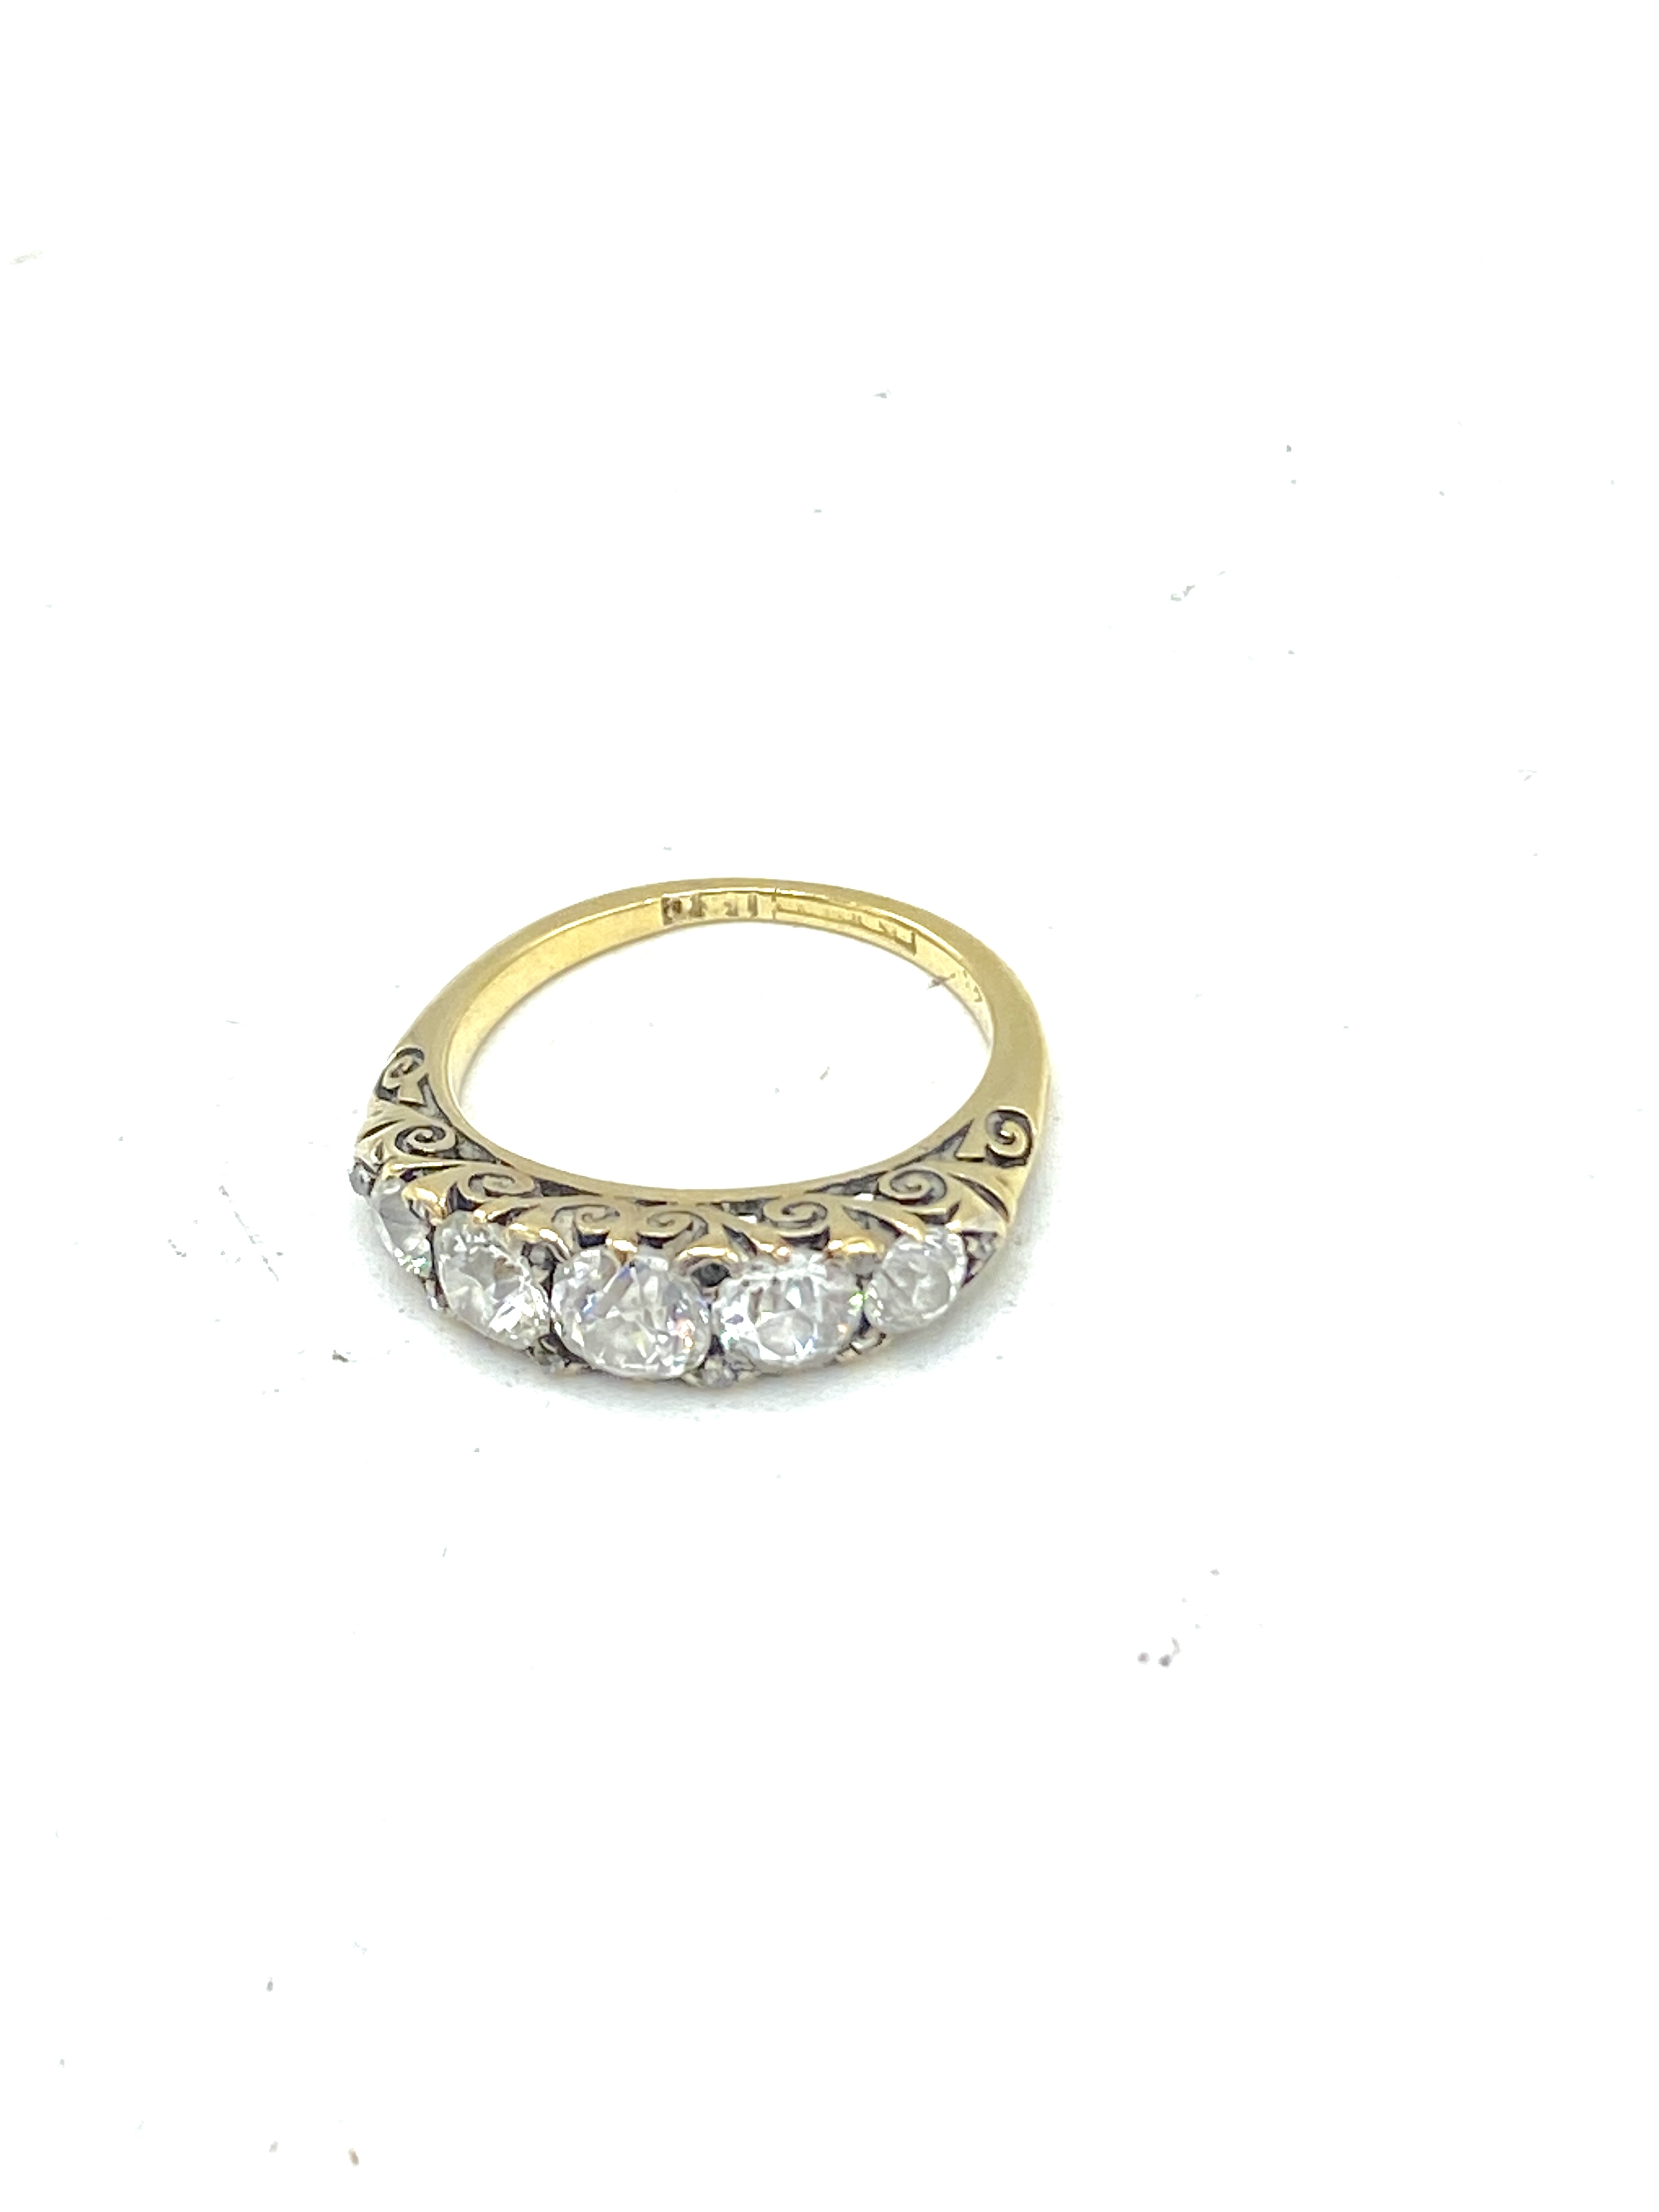 Five stone diamond ring set on an 18ct gold band - Image 2 of 4